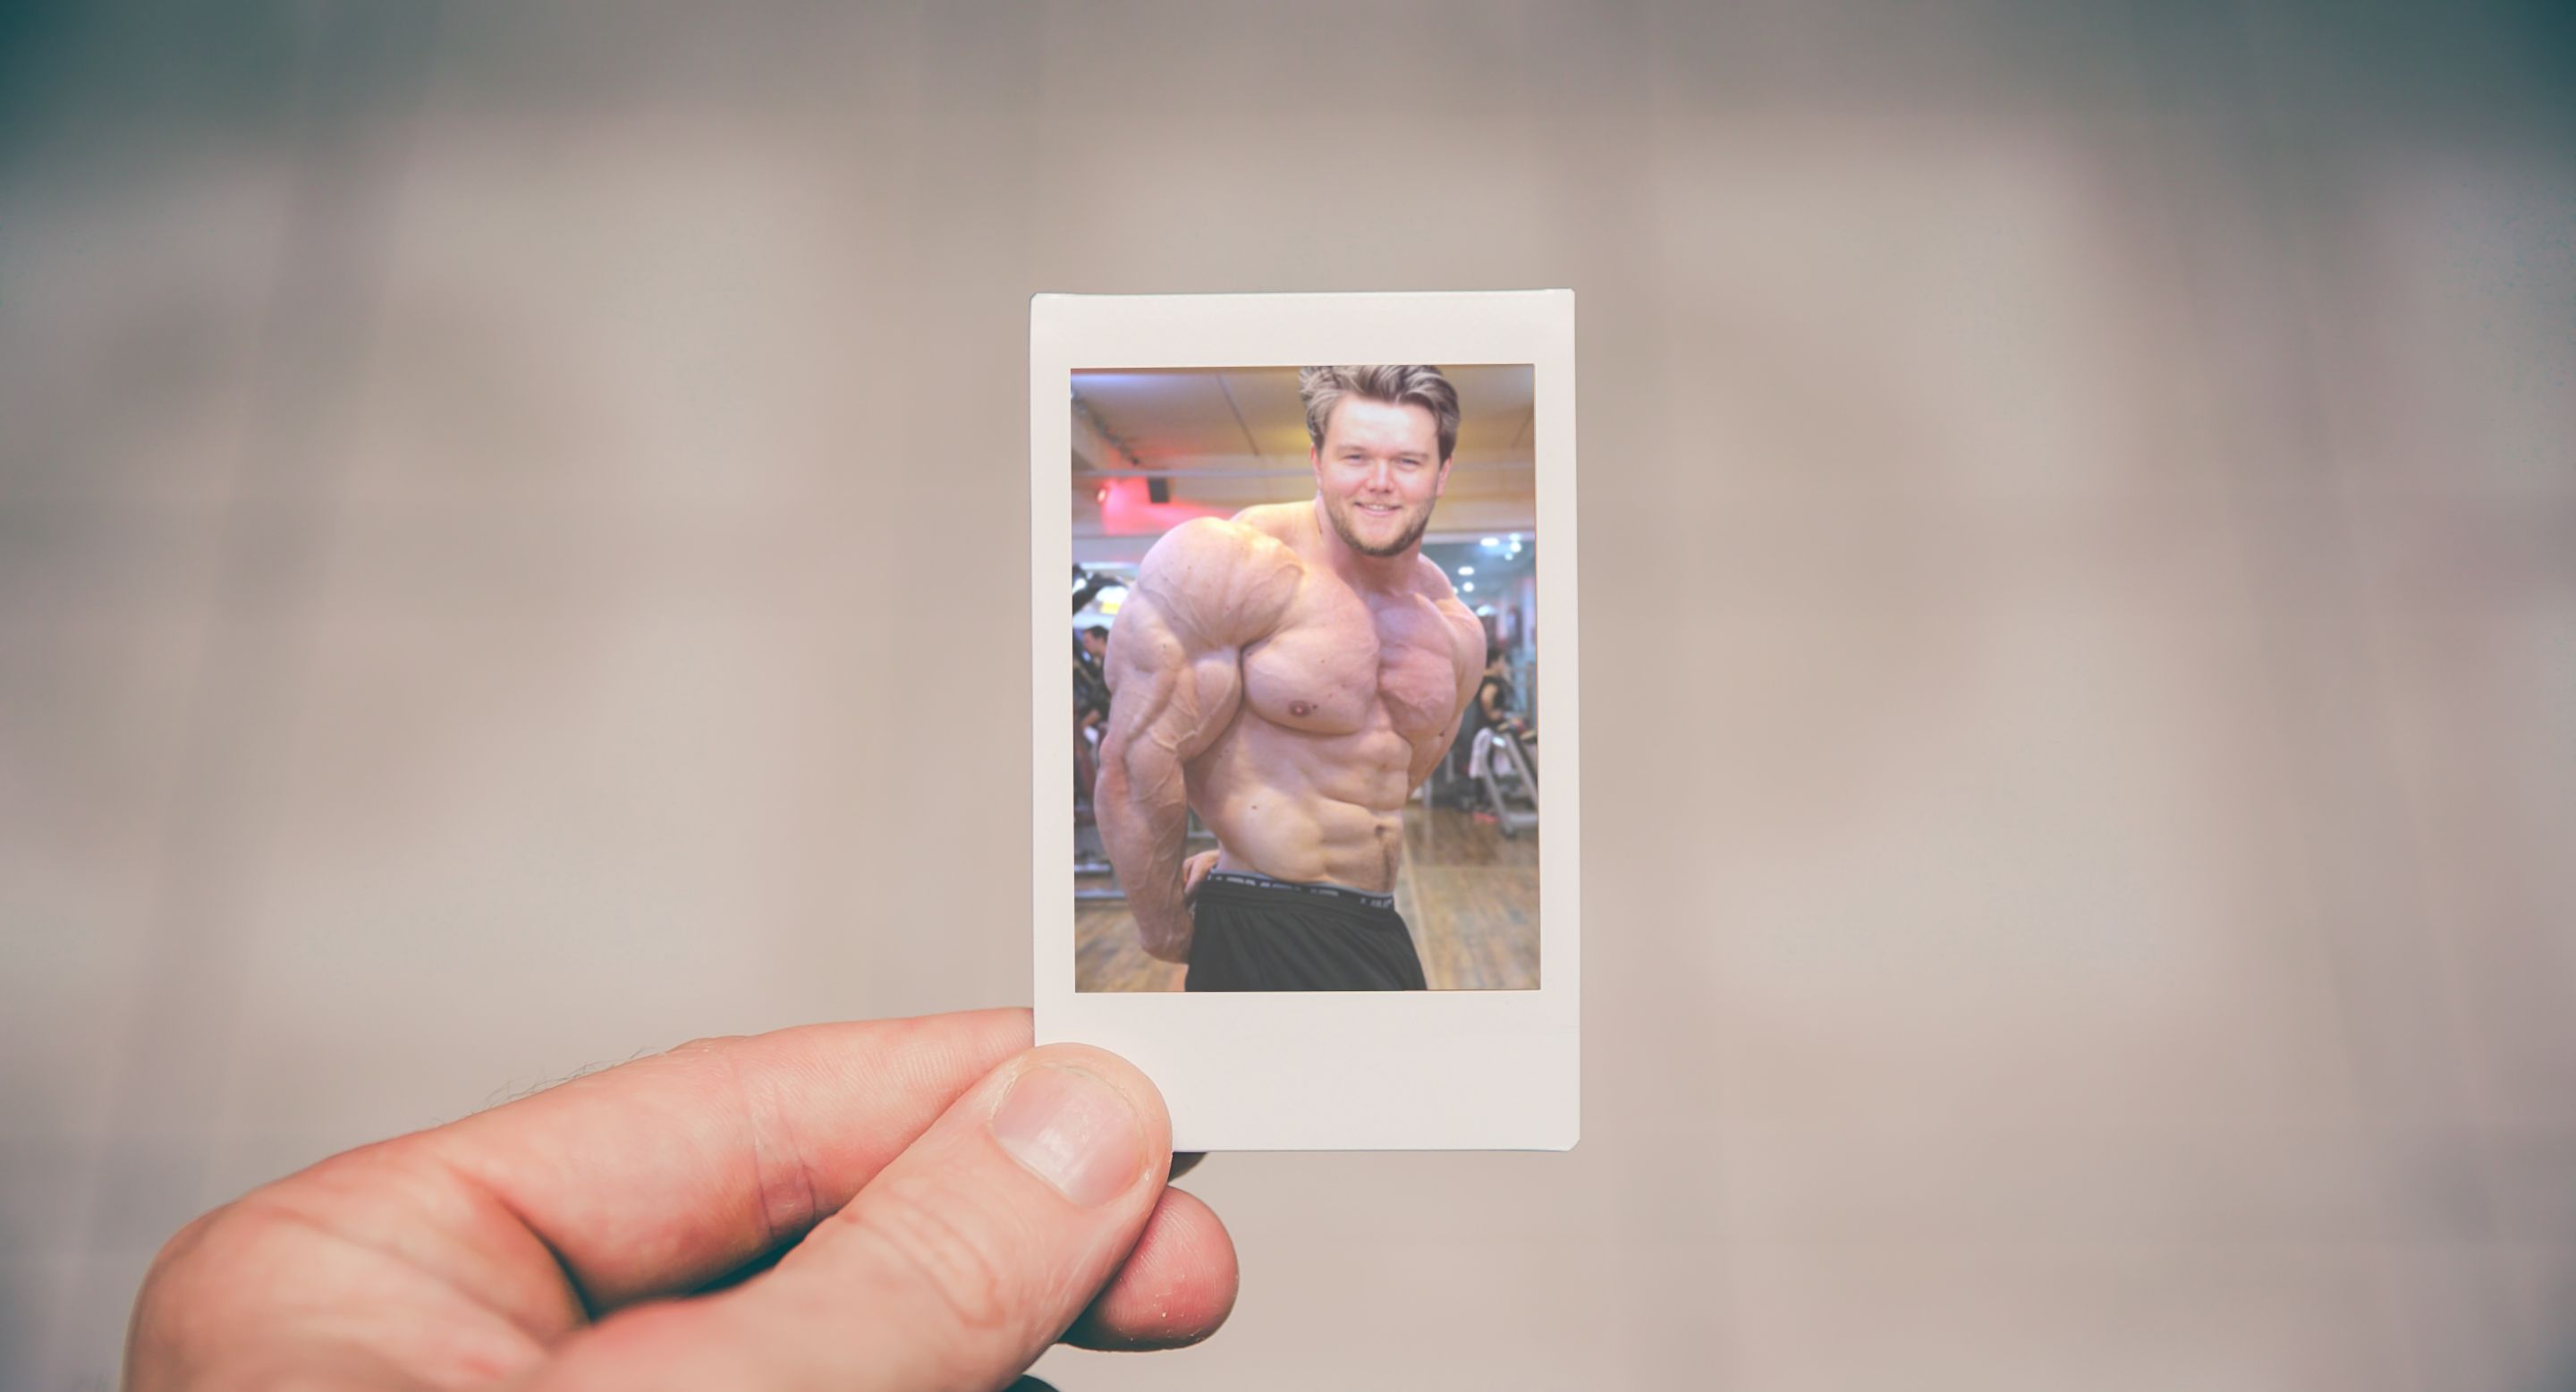 A hand holding a photo of a body builder